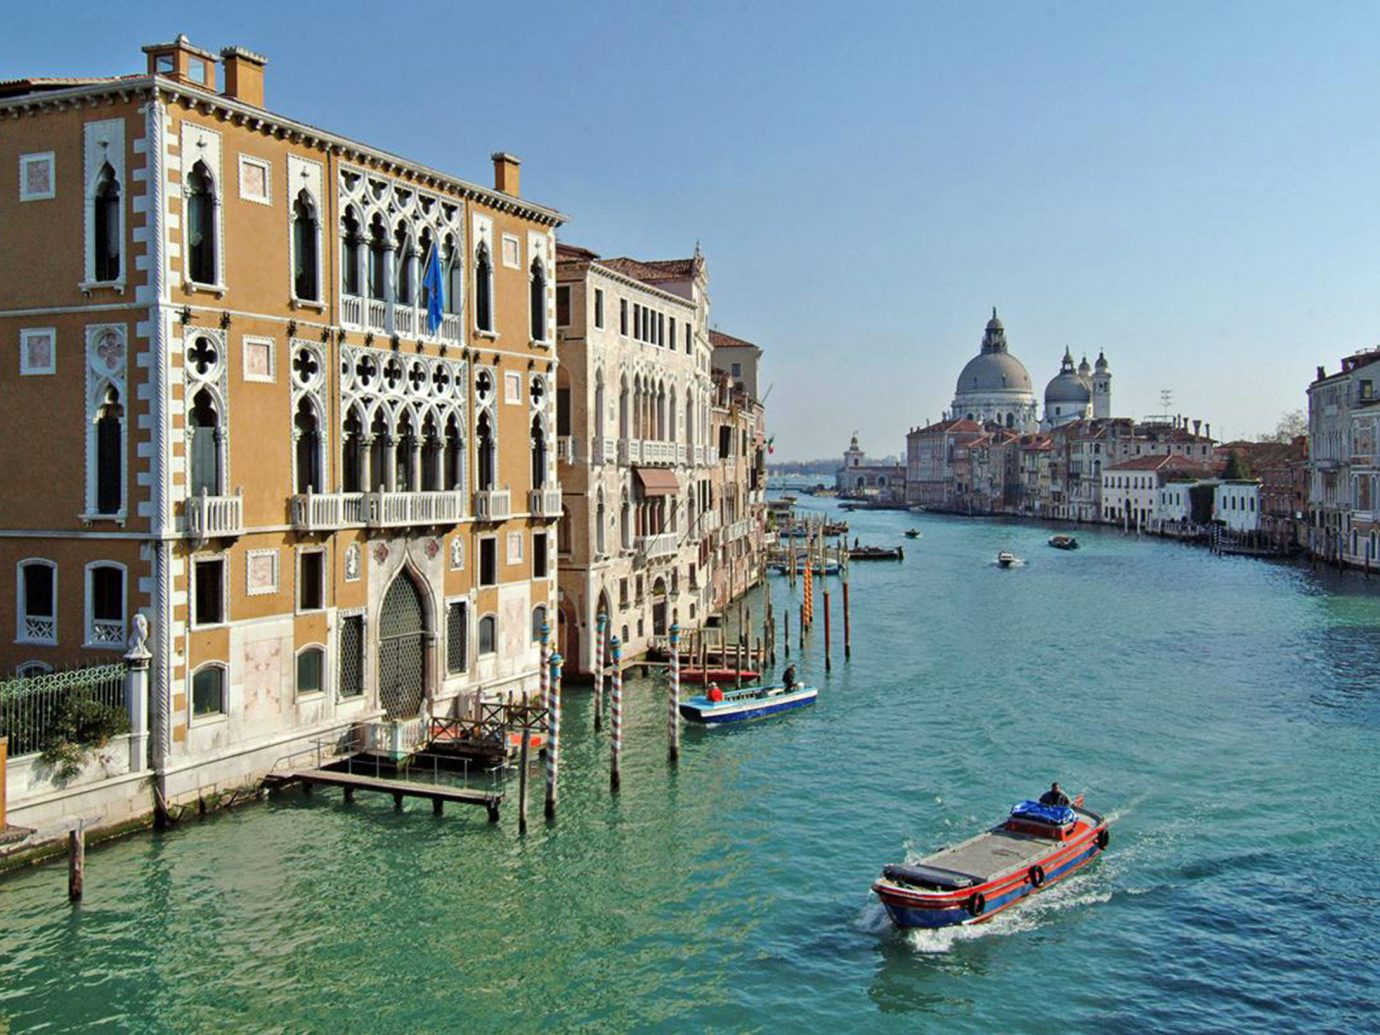 Hotels Italy Luxury Travel Trip Ideas Venice water sky Boat outdoor Canal landform geographical feature body of water Town waterway vehicle vacation River tourism channel gondola Sea cityscape Harbor traveling